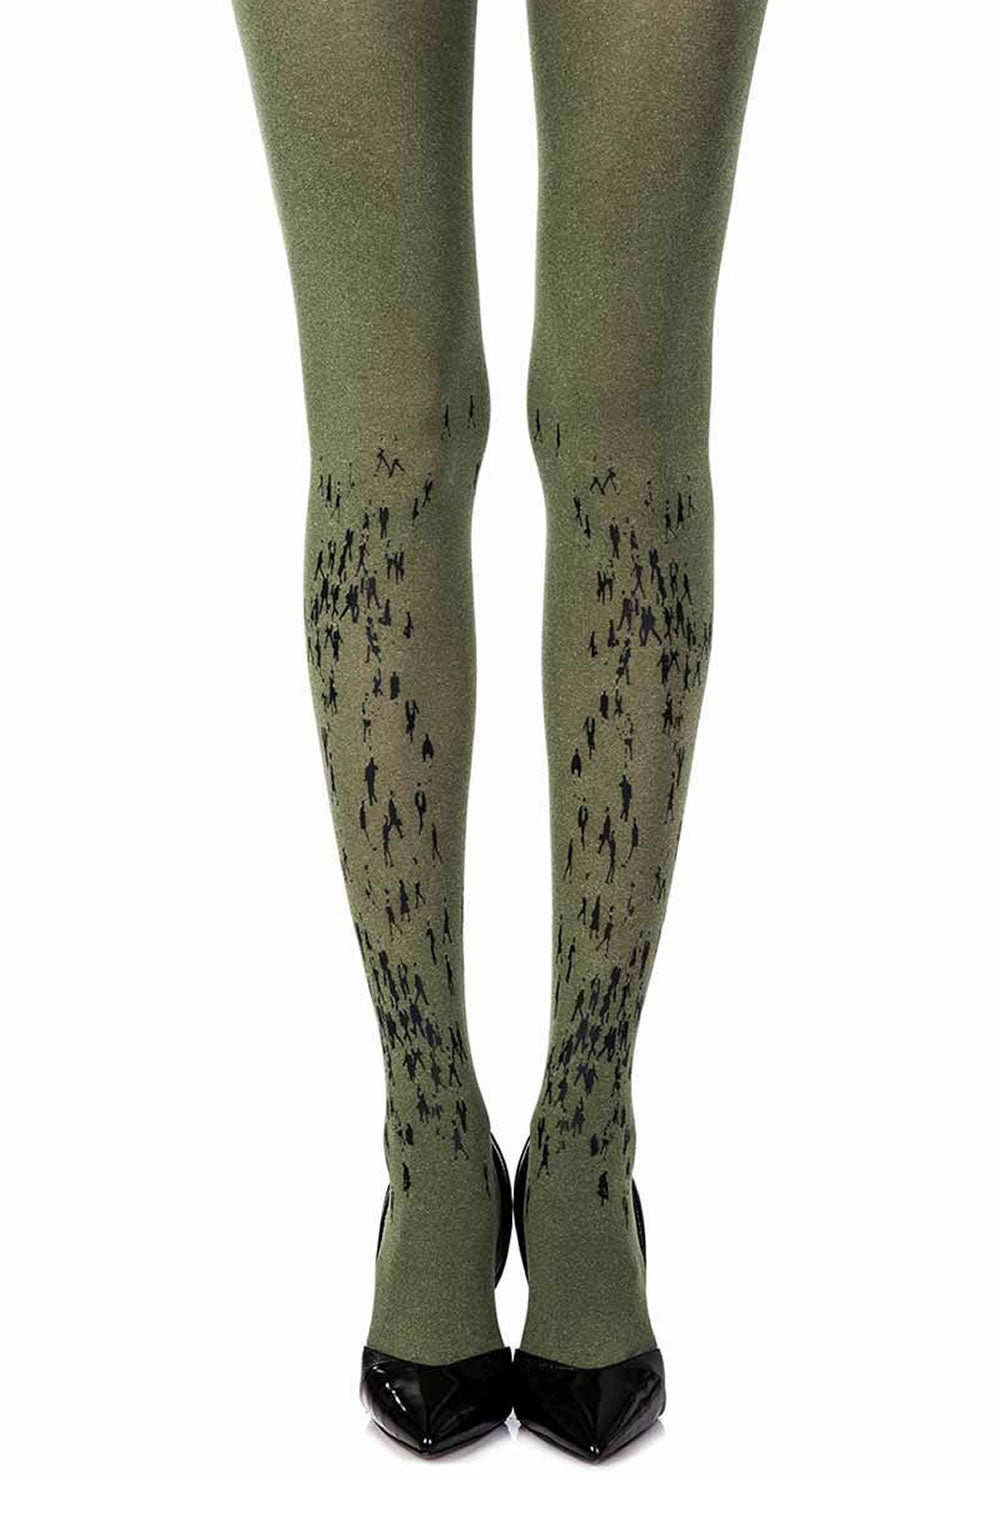 Zohara “Walking By” Green Print Tights  All Offers, Hosiery, NEWLY-IMPORTED, Tights, Zohara - So Luxe Lingerie